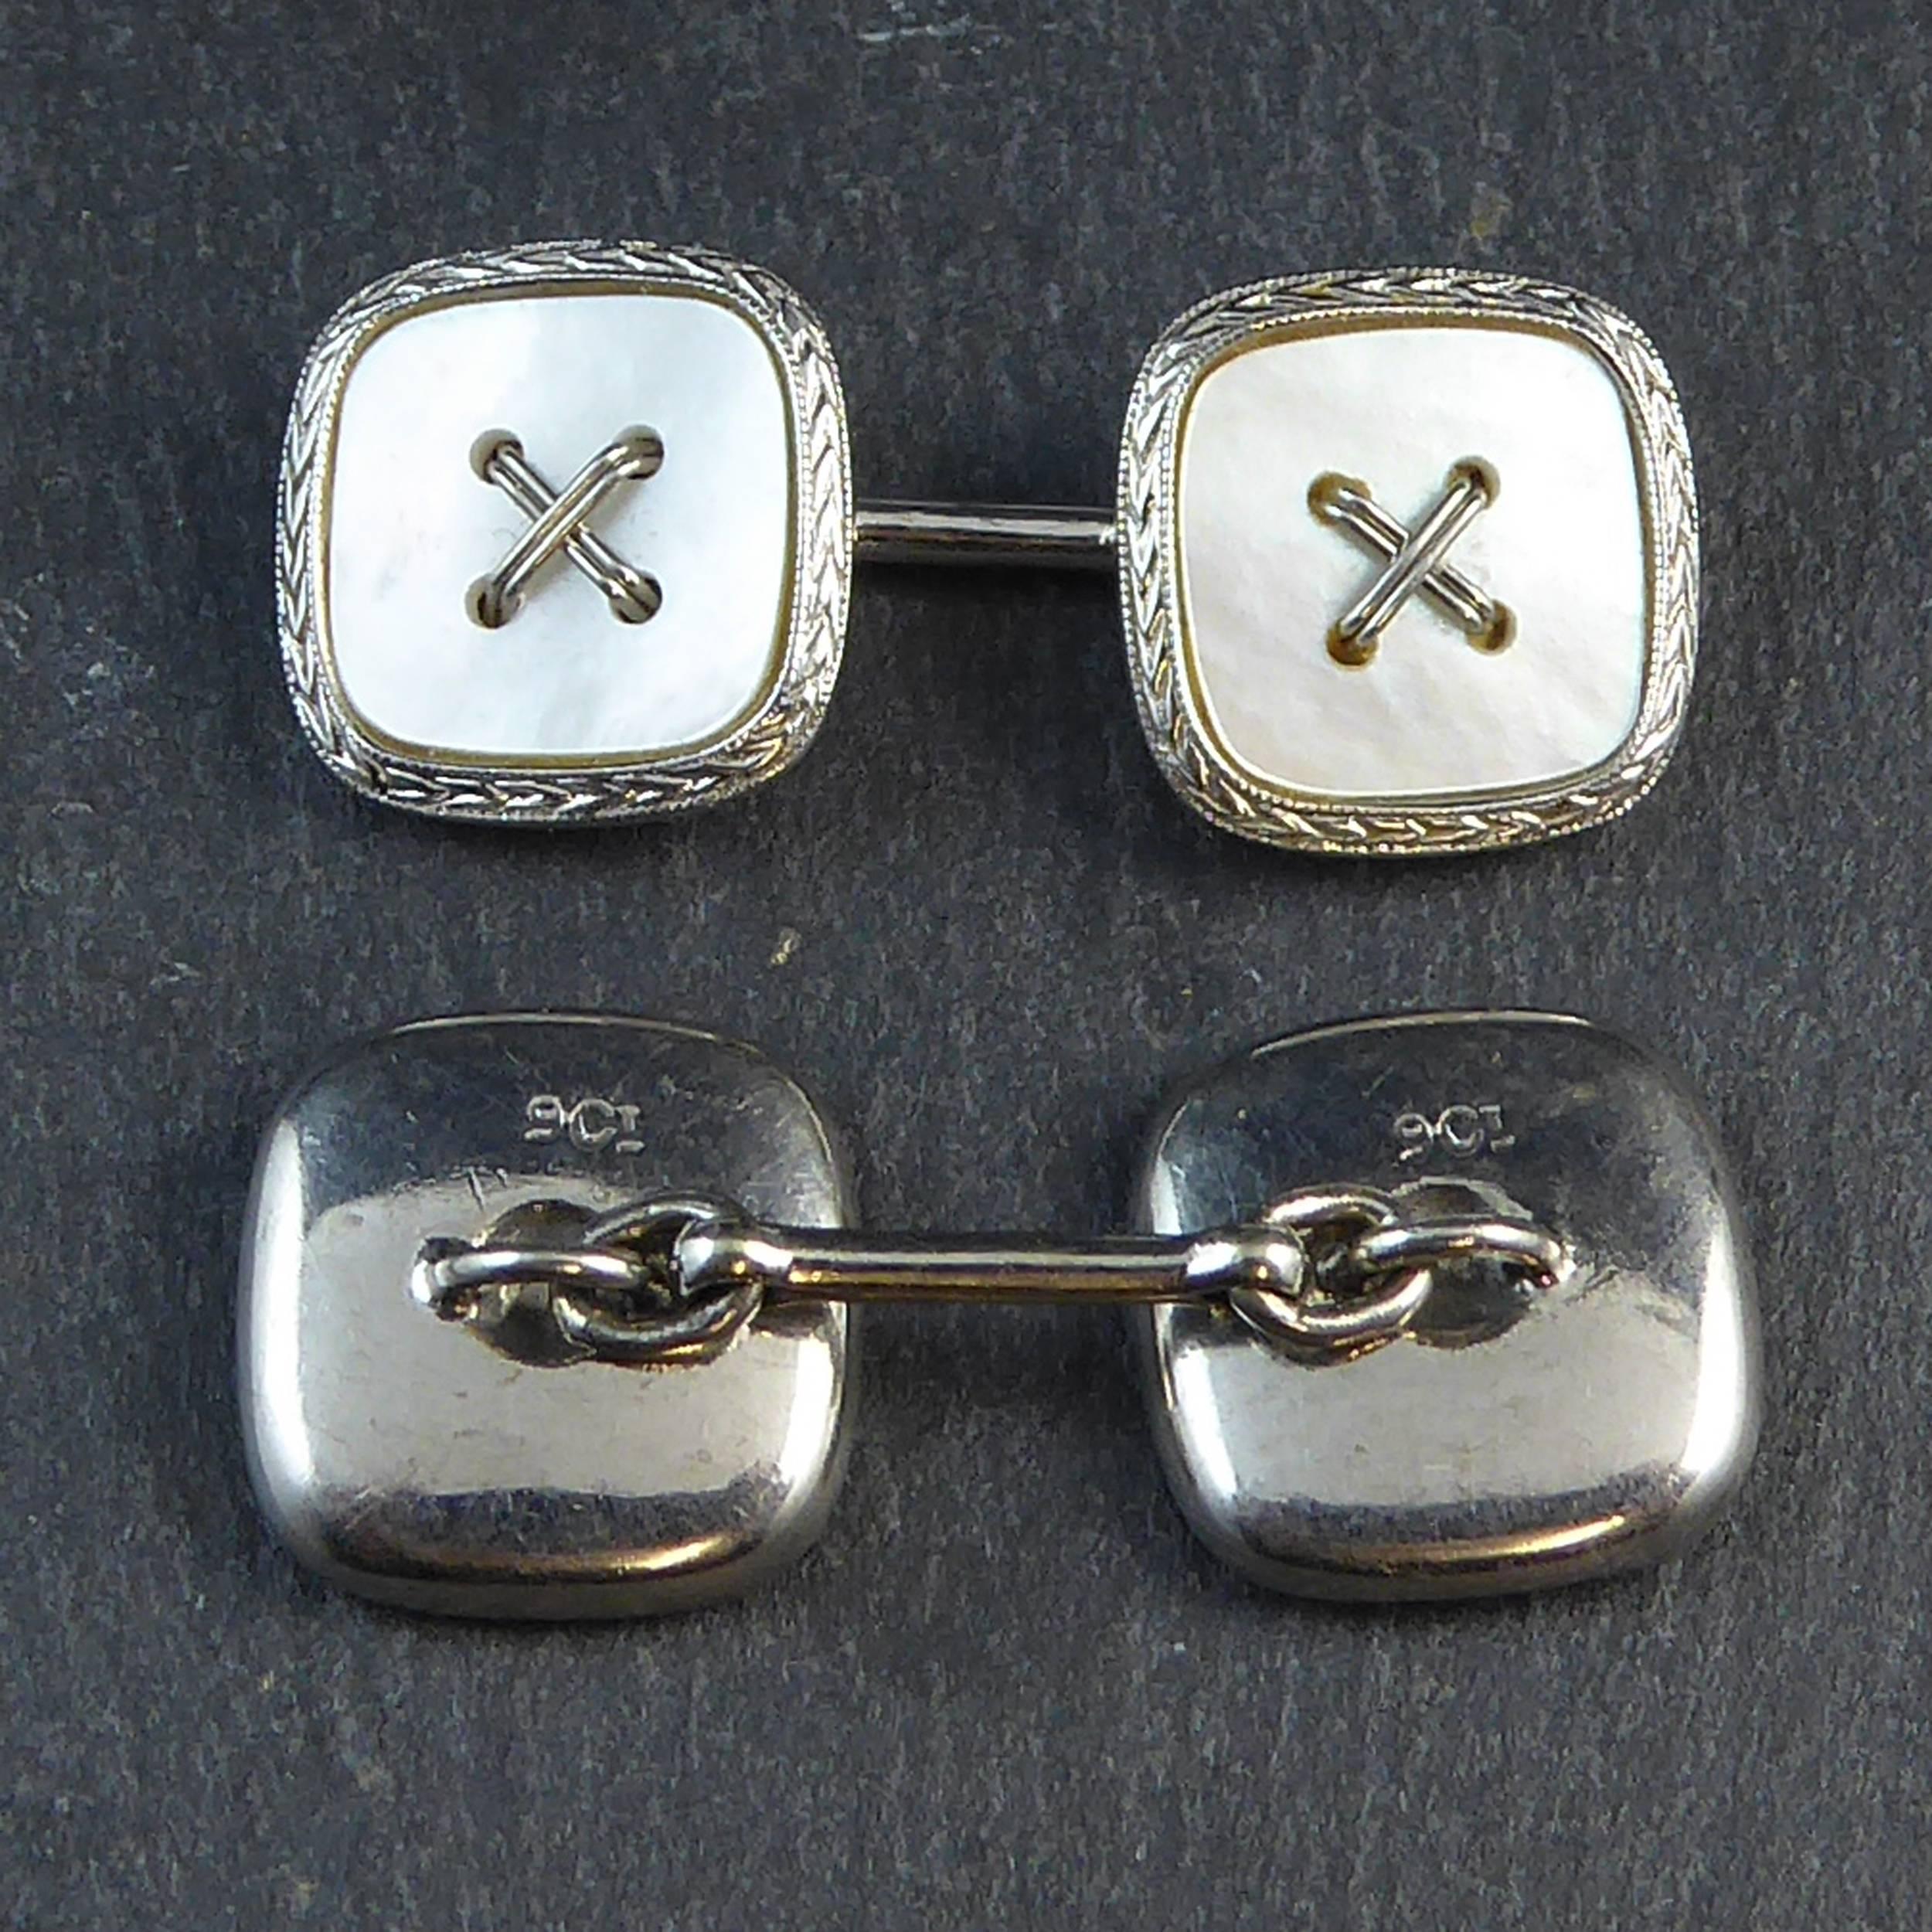 Men's Vintage Art Deco Button Cufflinks, White Gold, Mother-of-Pearl